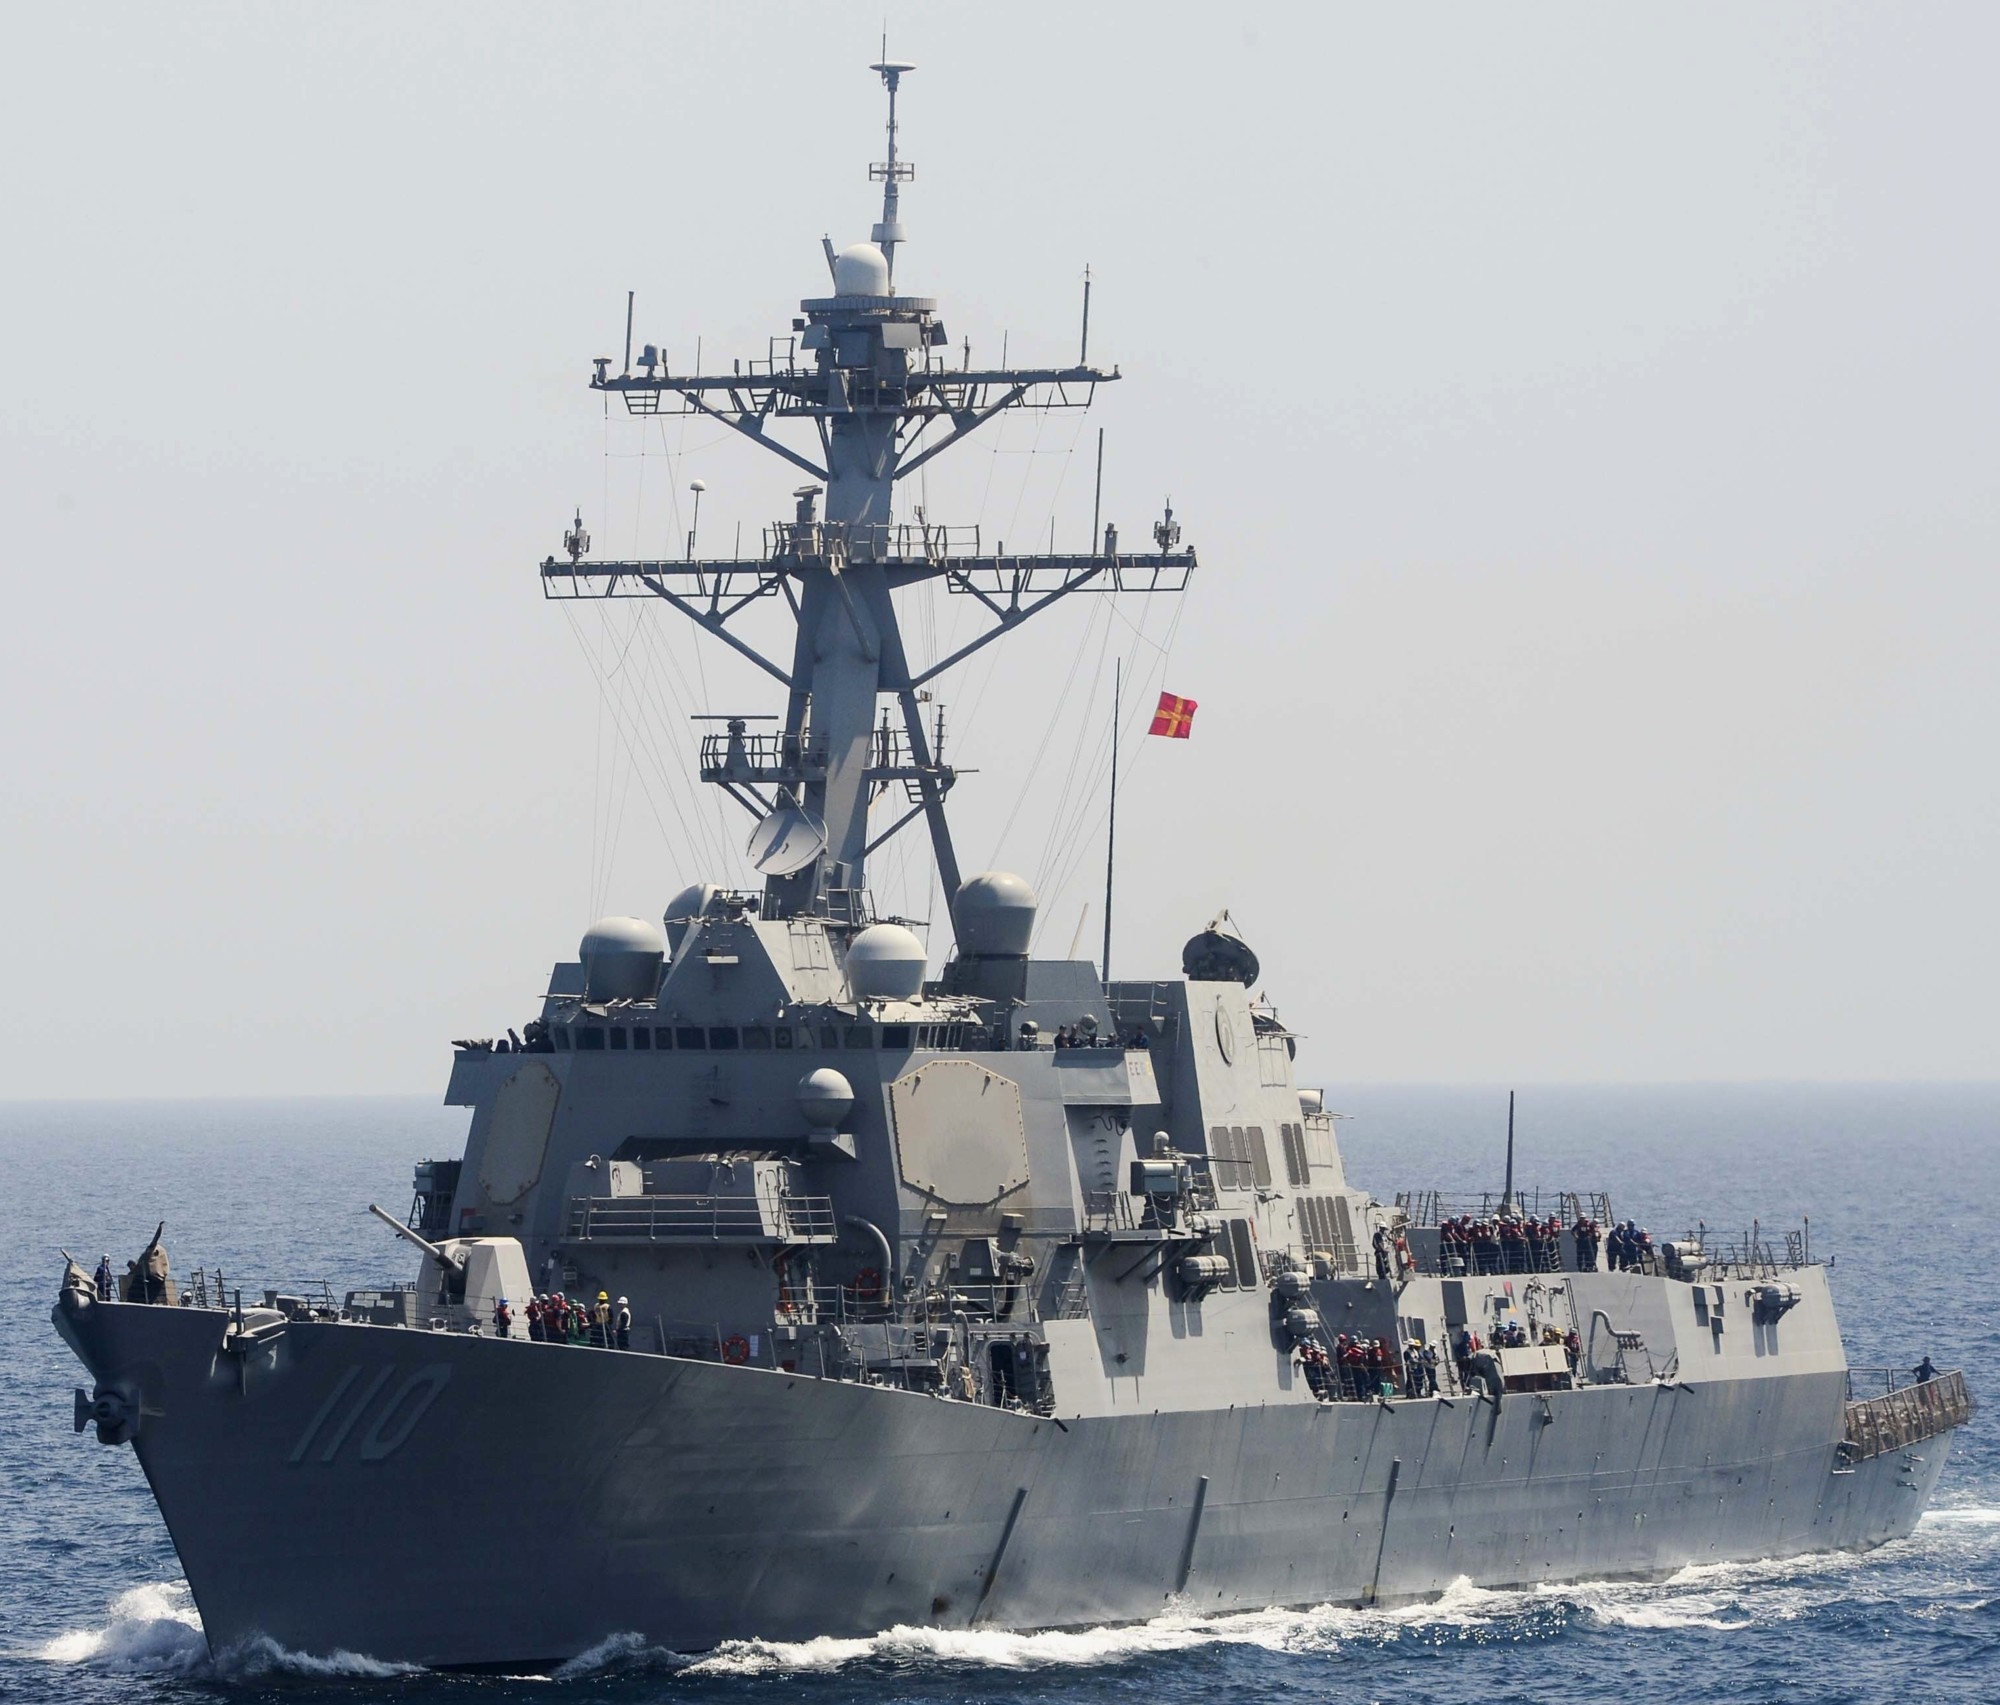 ddg-110 uss william p. lawrence arleigh burke class guided missile destroyer aegis us navy persian gulf 06